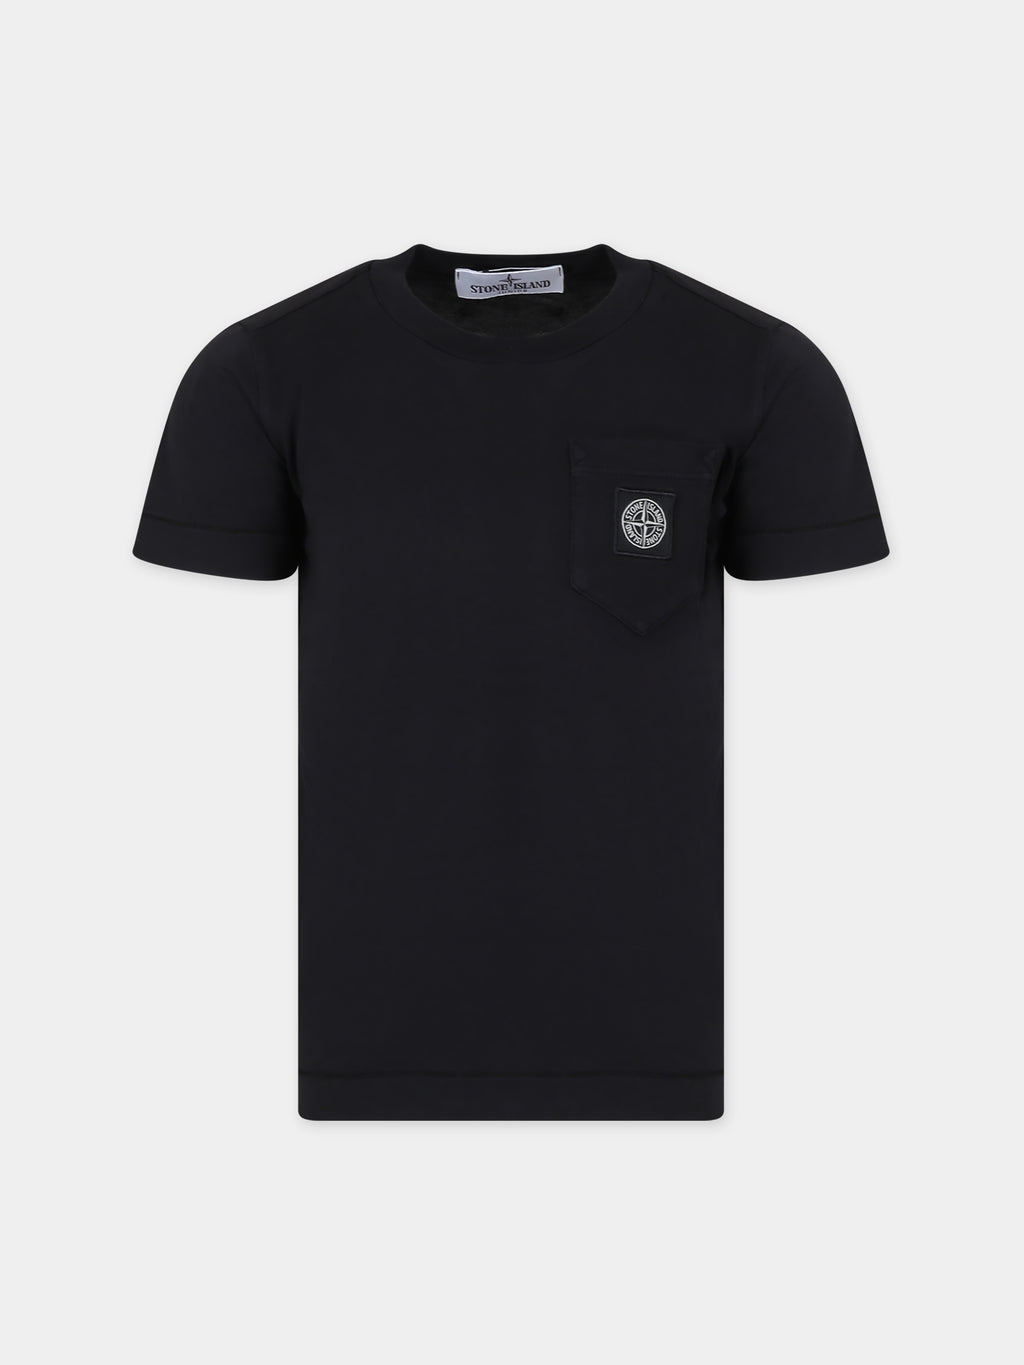 Black T-shirt for boy with logo